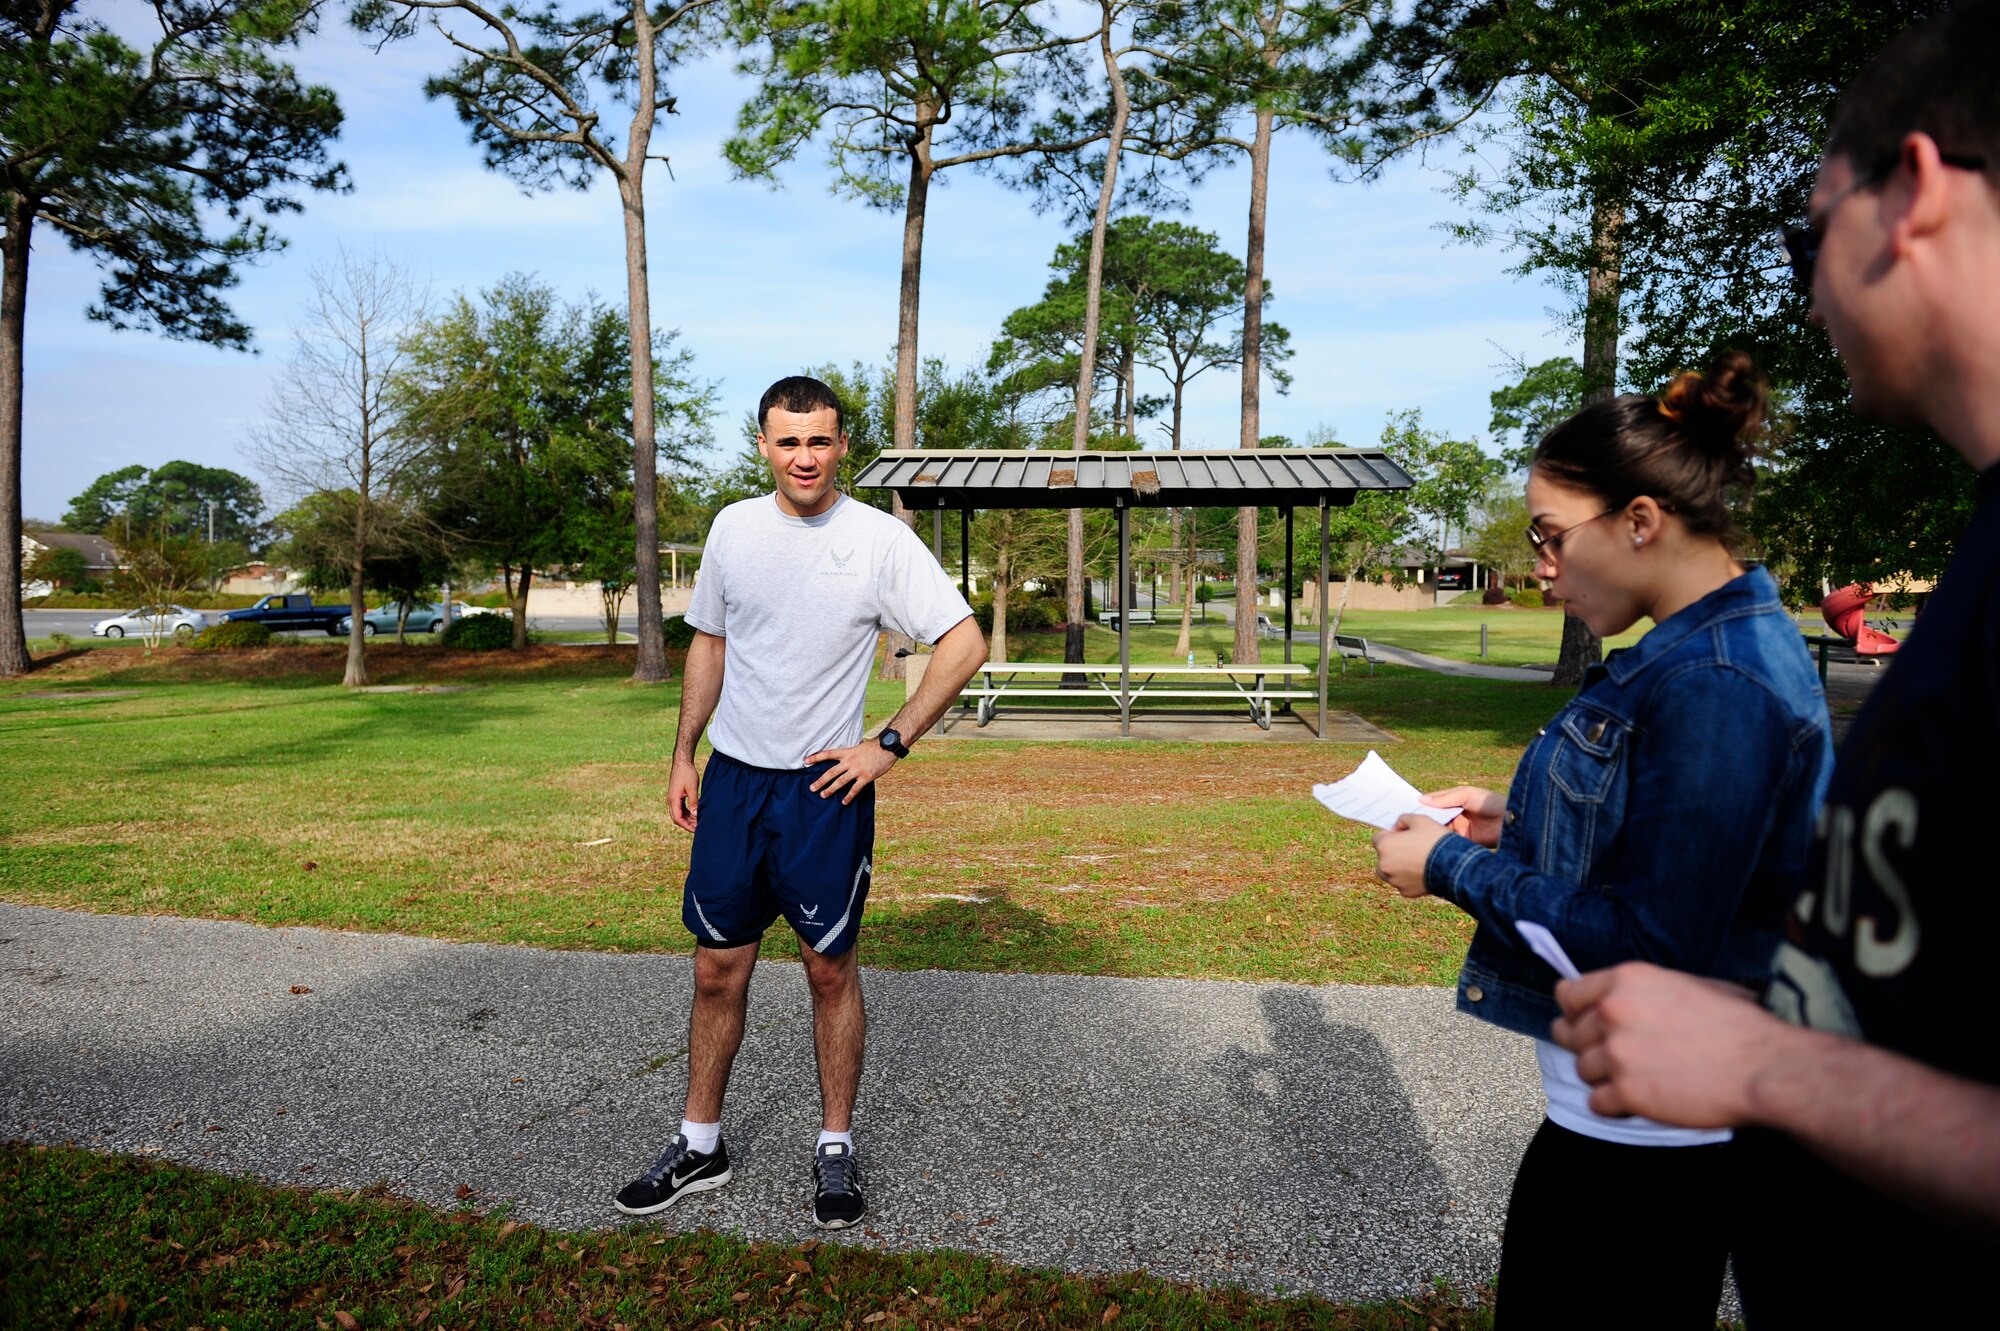 An Airman answers sexual assault questions while his teammates perform exercises during the CLEAR Challenge Obstacle Course on Hurlburt Field Fla., April 11, 2014. The courses represented things one may encounter in their personal and work life. (U.S. Air Force photo/Senior Airman Krystal M. Garrett)